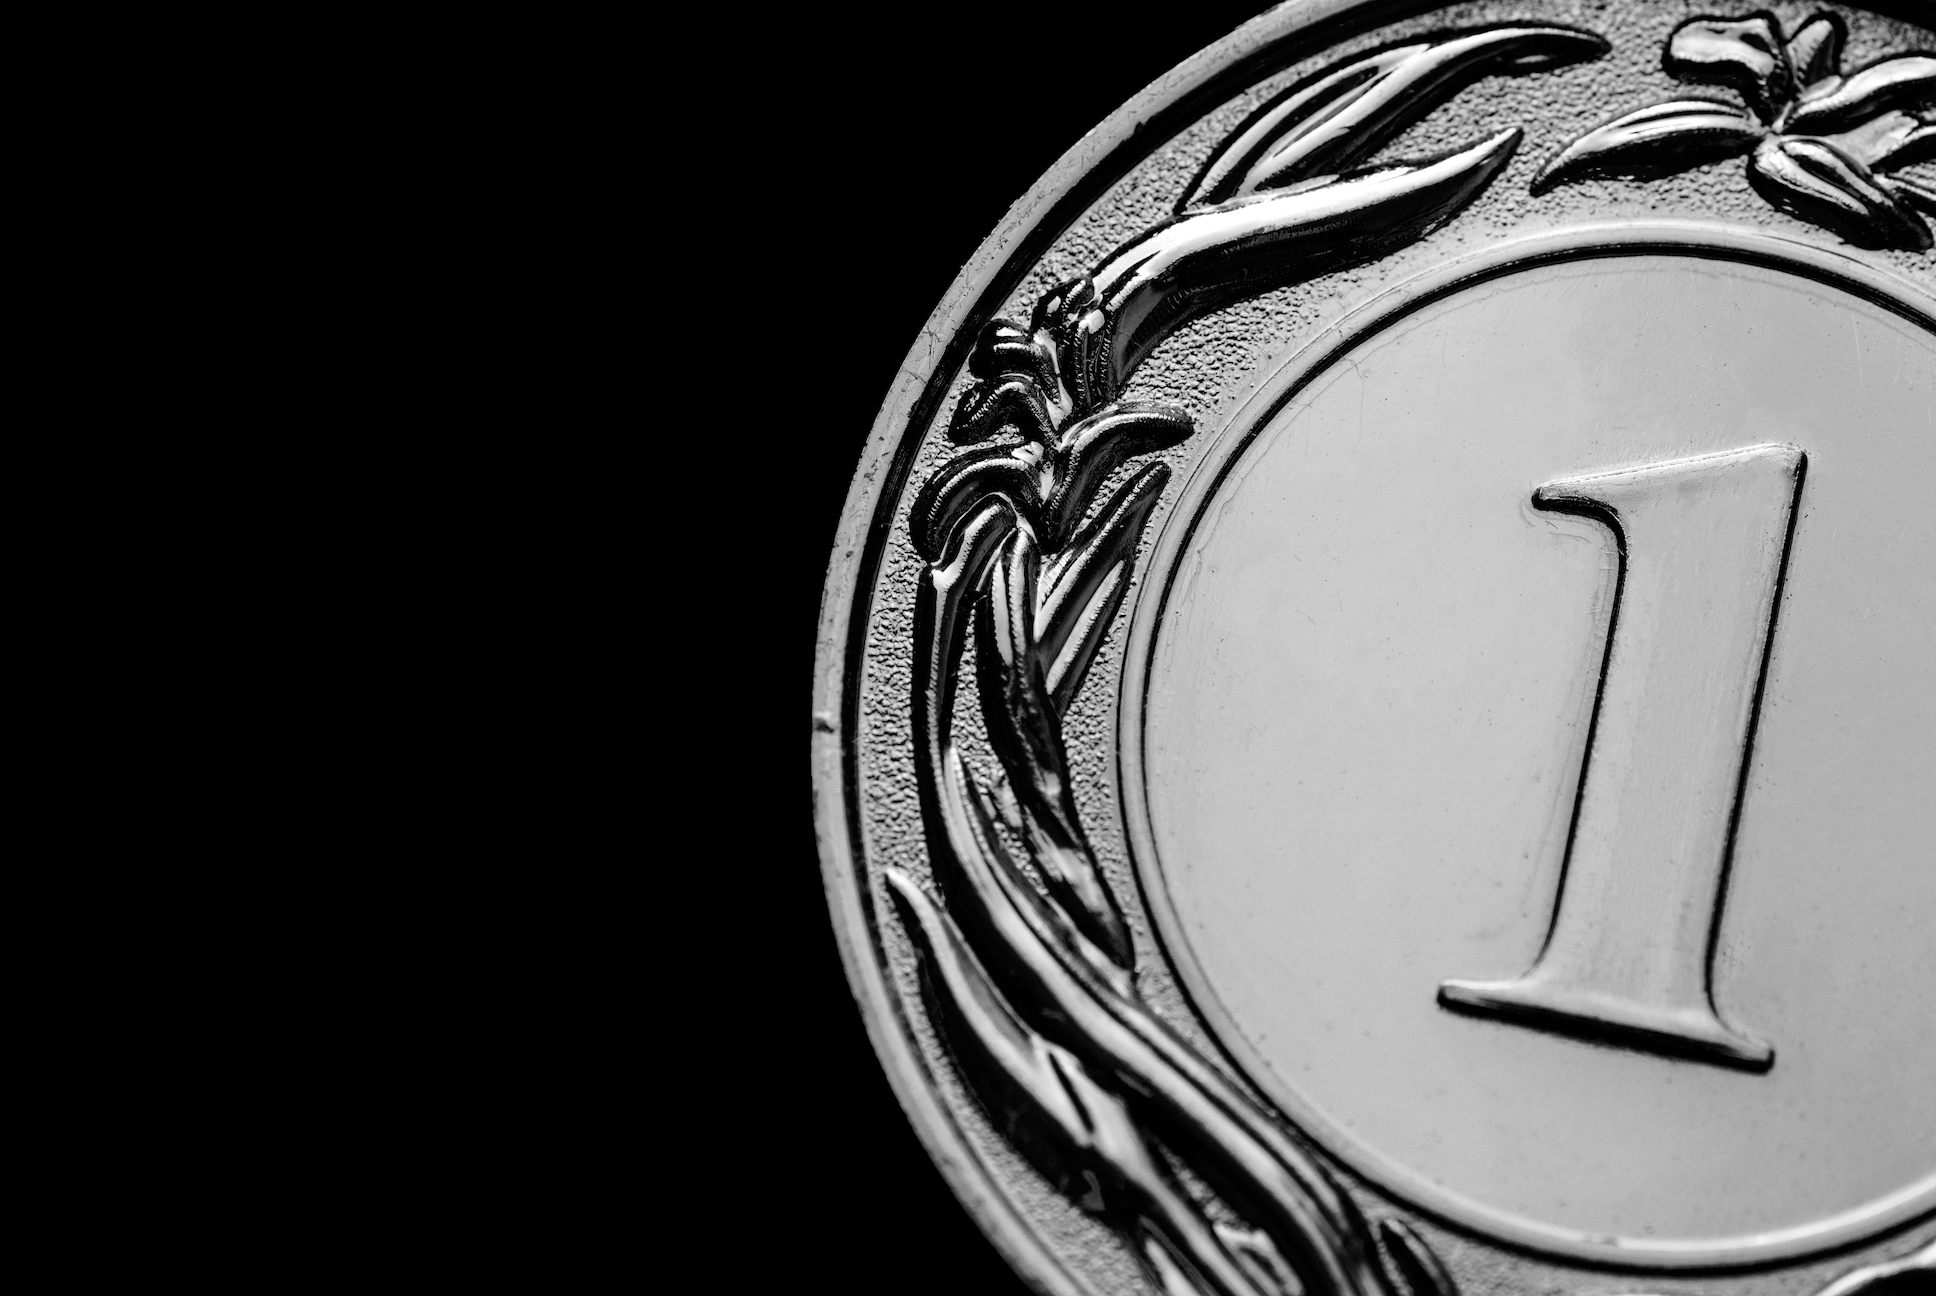 Black and white close up image of a first place medal